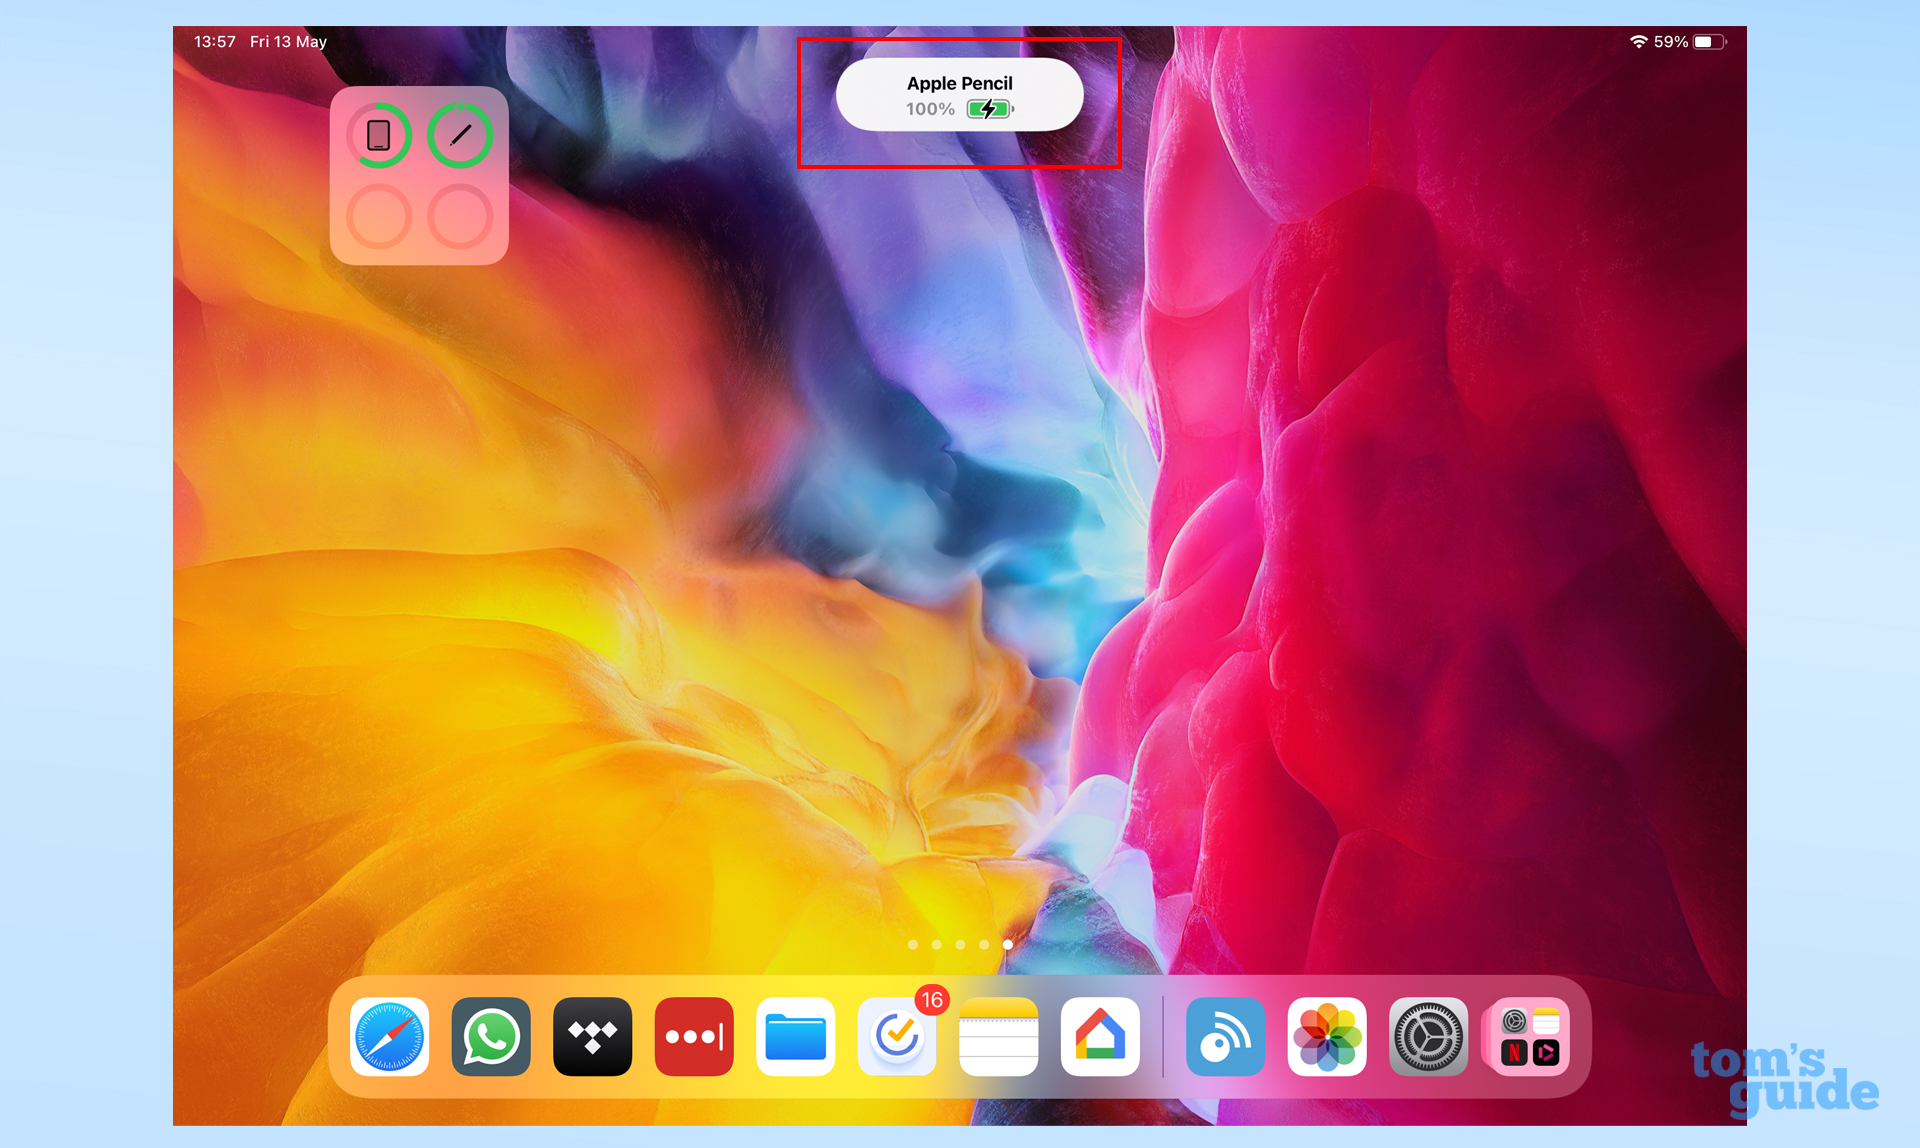 iPad home screen, showing Apple Pencil 2nd generation charging indicator